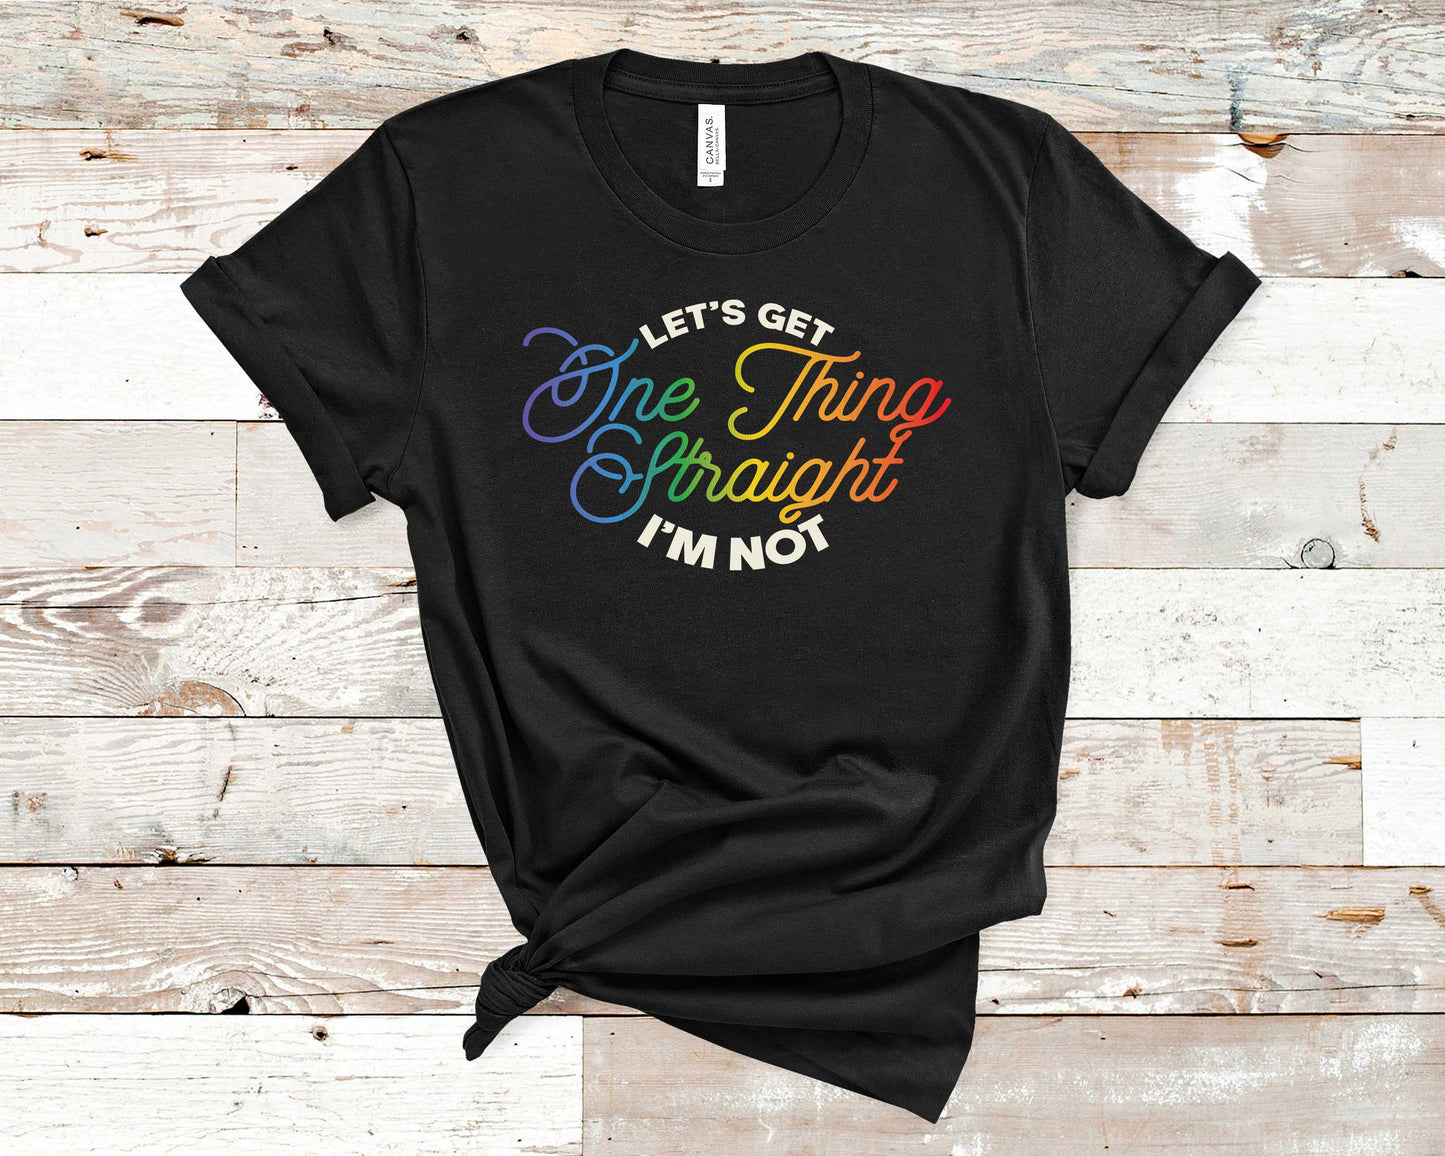 Let's Get One Thing Straight, I'm Not - LGBTQ